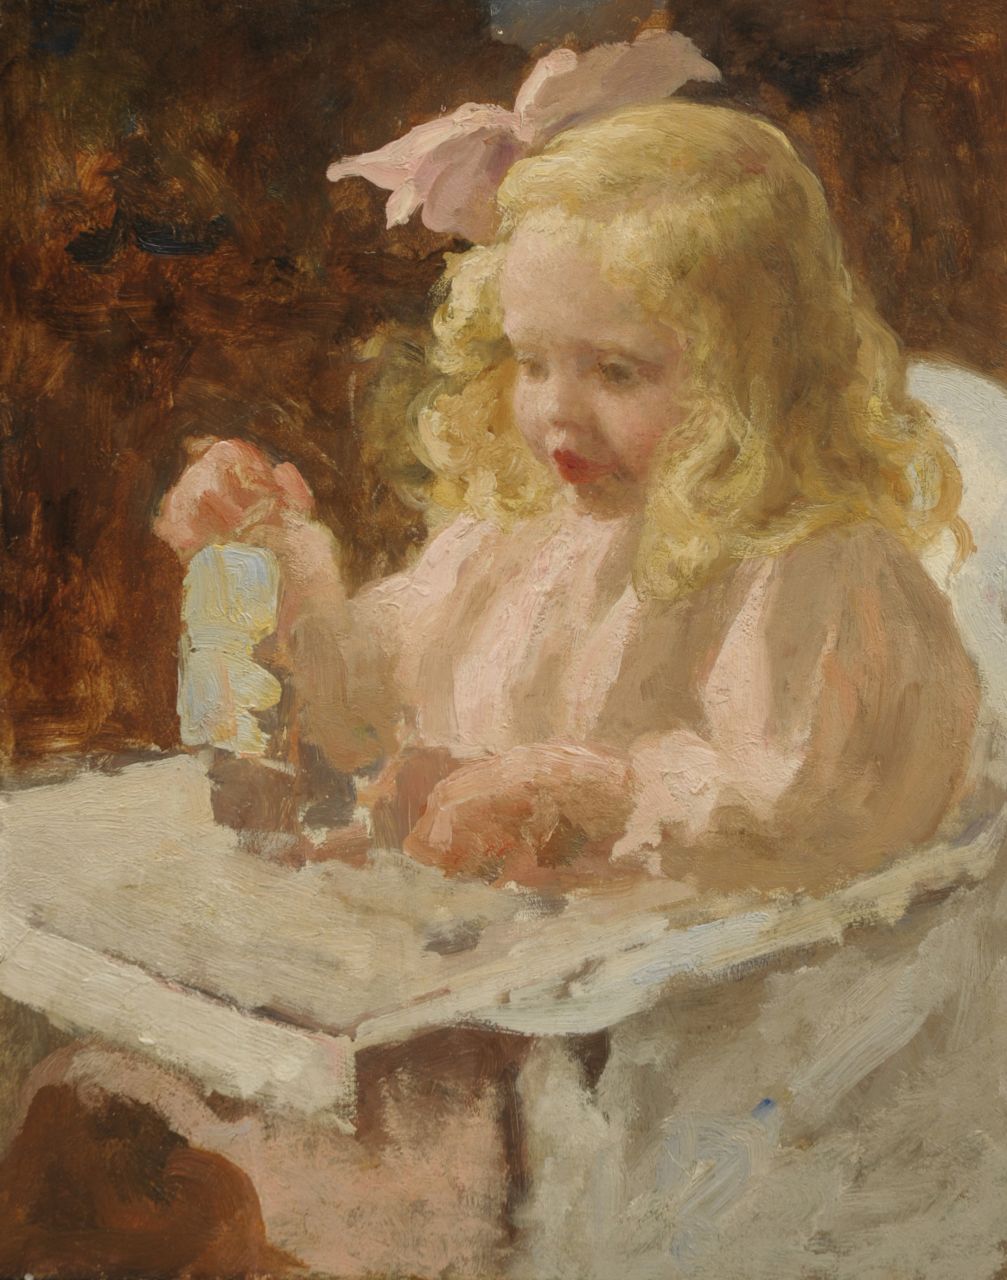 Pieters E.  | Evert Pieters, Maria Jacoba van Rijckevorsel at the age of 3, oil on panel 39.8 x 31.8 cm, painted ca. 1913